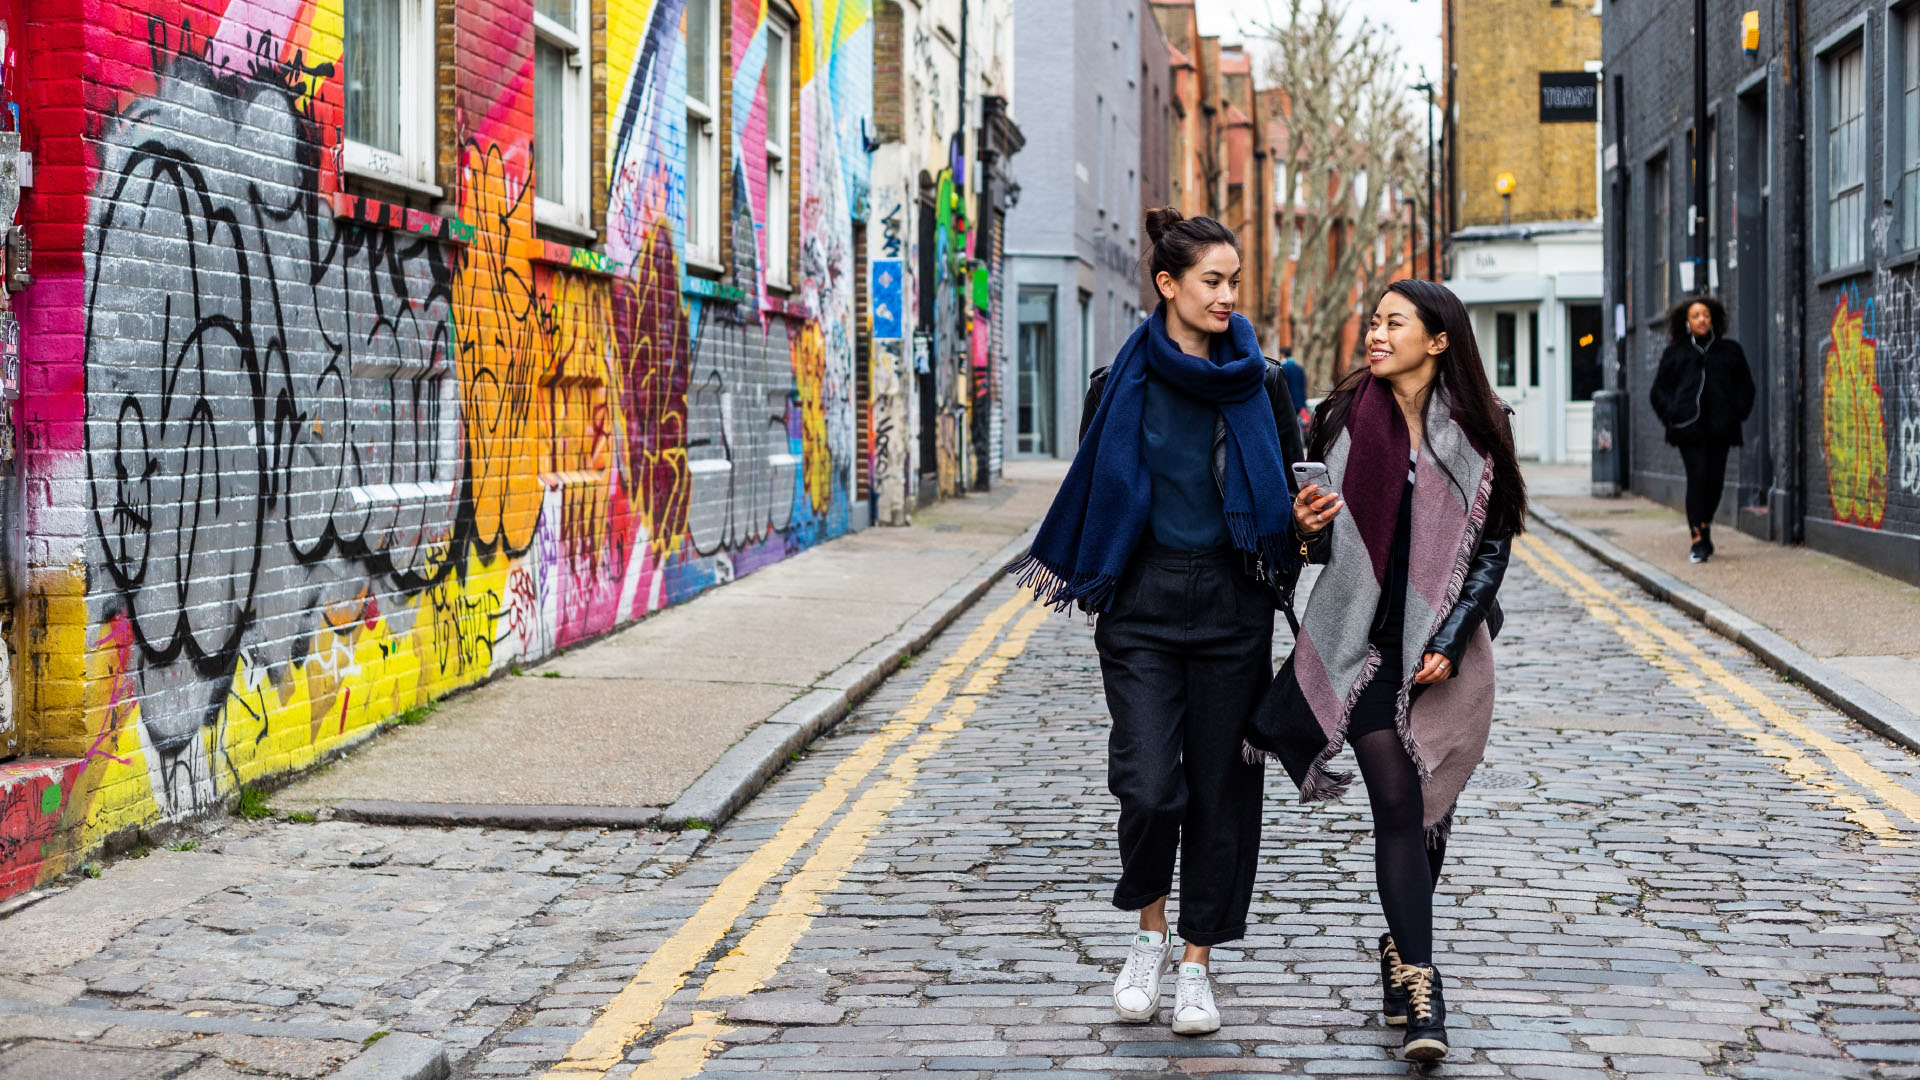 Couple smile at each other as they walk down road past Shoreditch street art on a date.